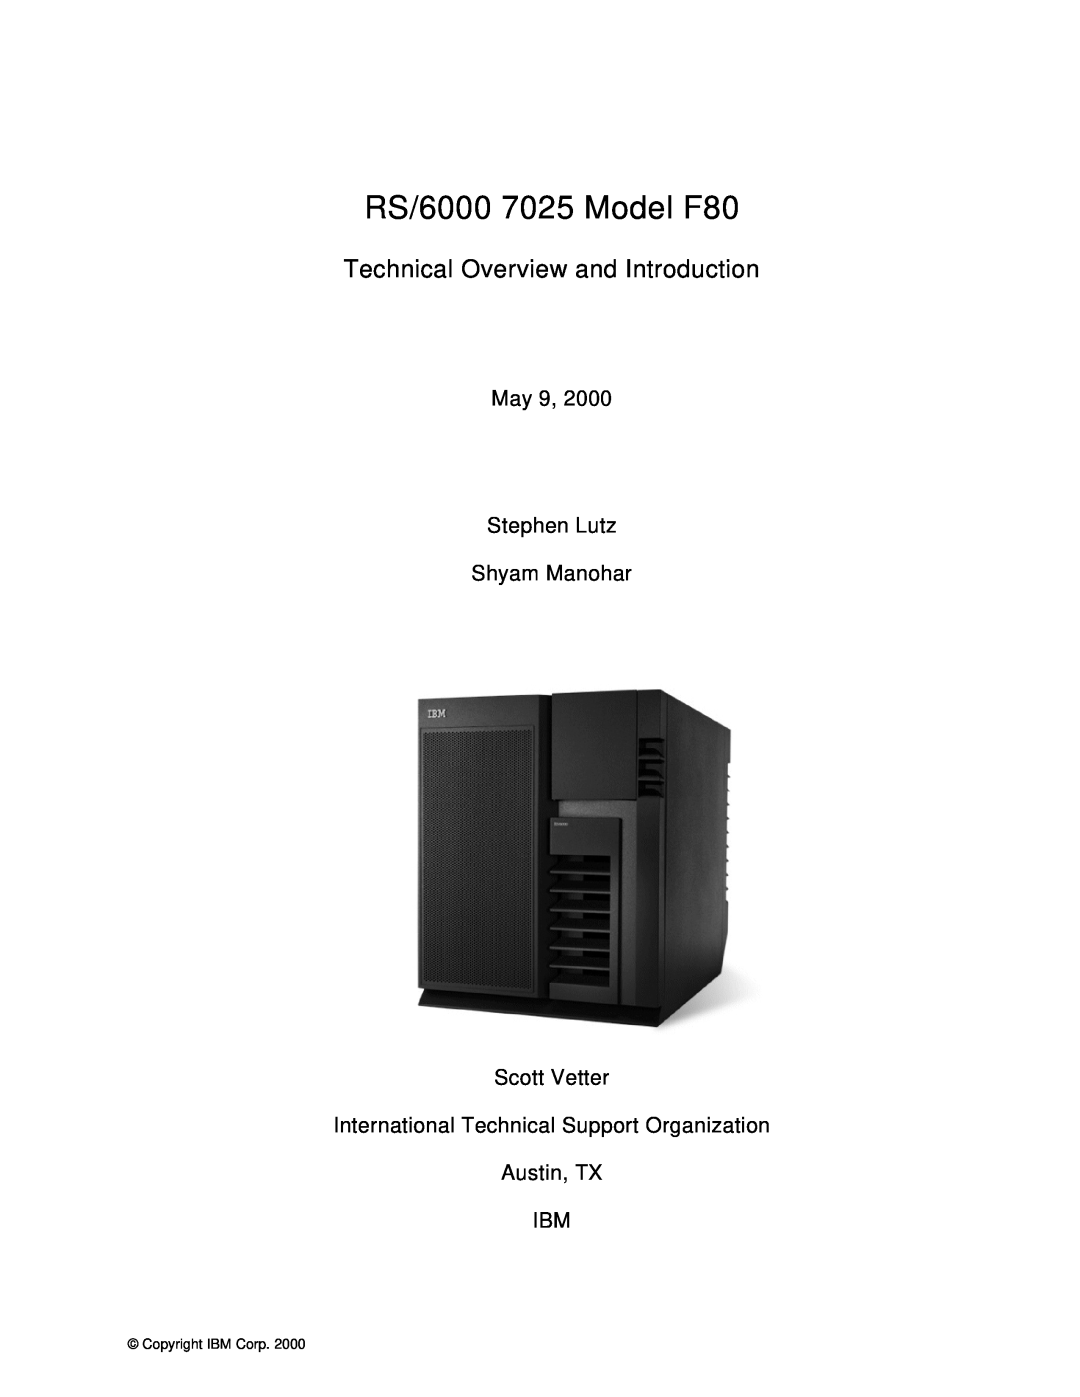 IBM manual RS/6000 7025 Model F80, Technical Overview and Introduction, May 9 Stephen Lutz Shyam Manohar Scott Vetter 